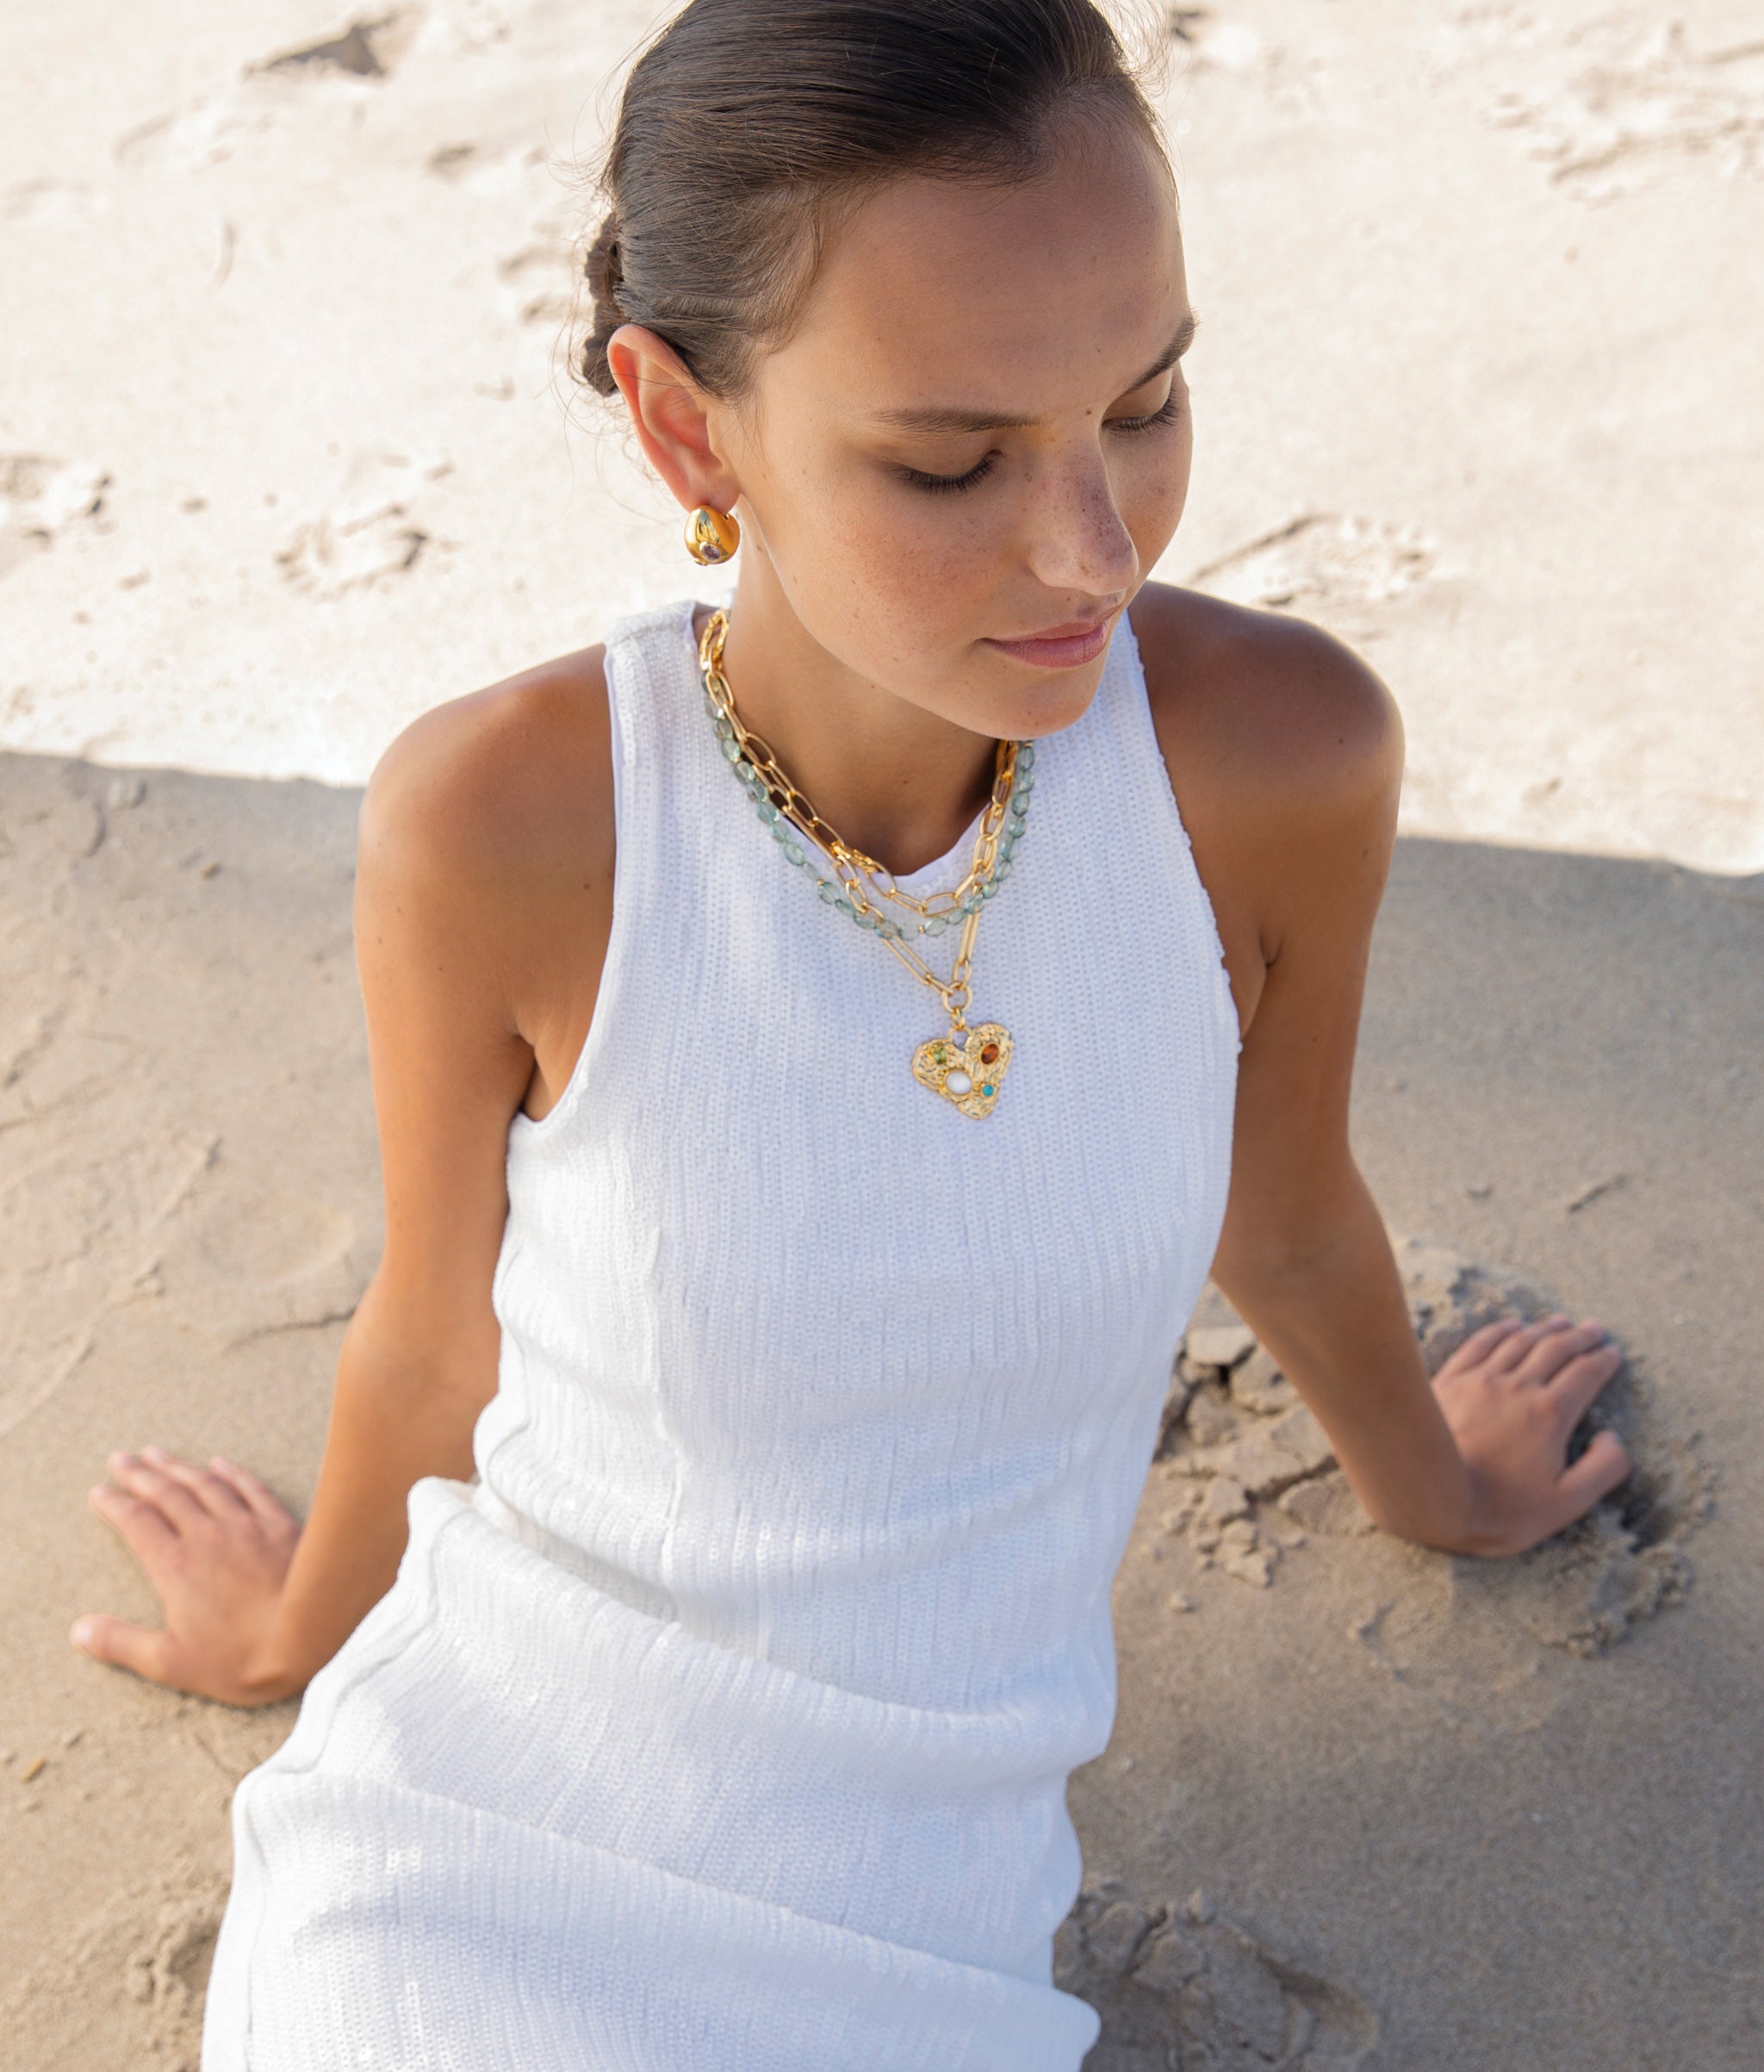 Model on sand background wearing Treasure Trove Necklace.